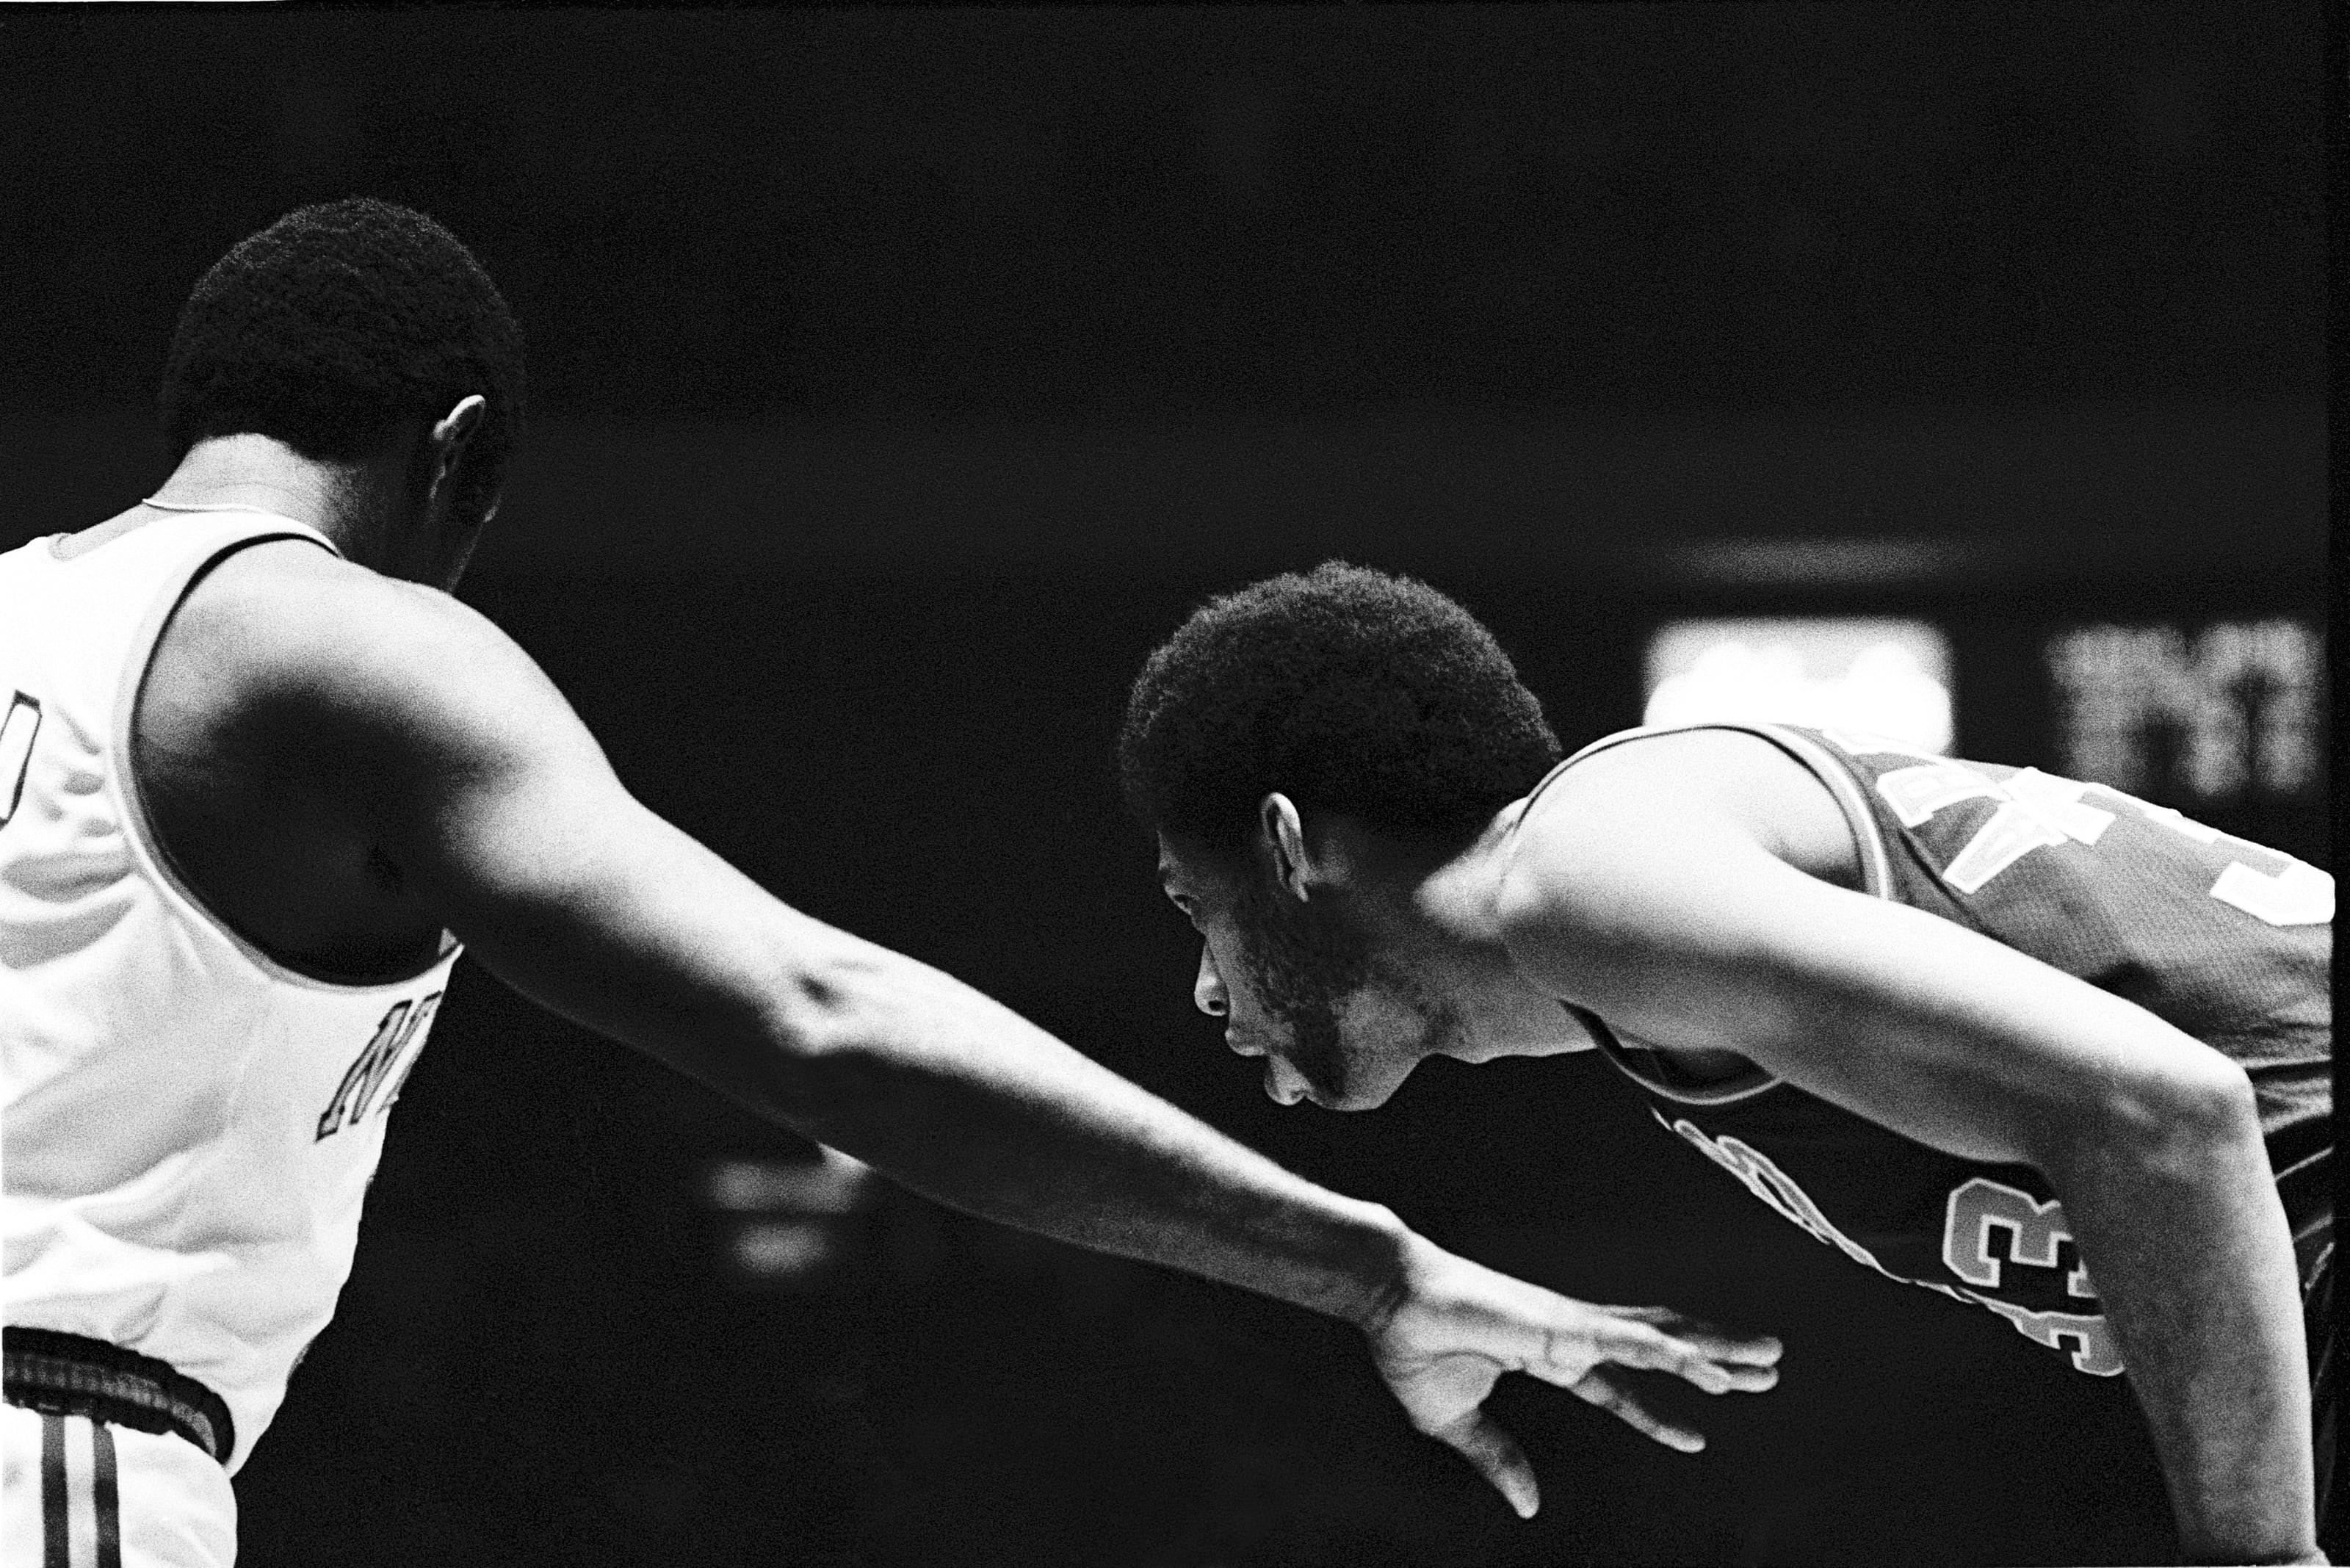 NY Knicks: Who was the better center? Patrick Ewing or Willis Reed? - Page 2